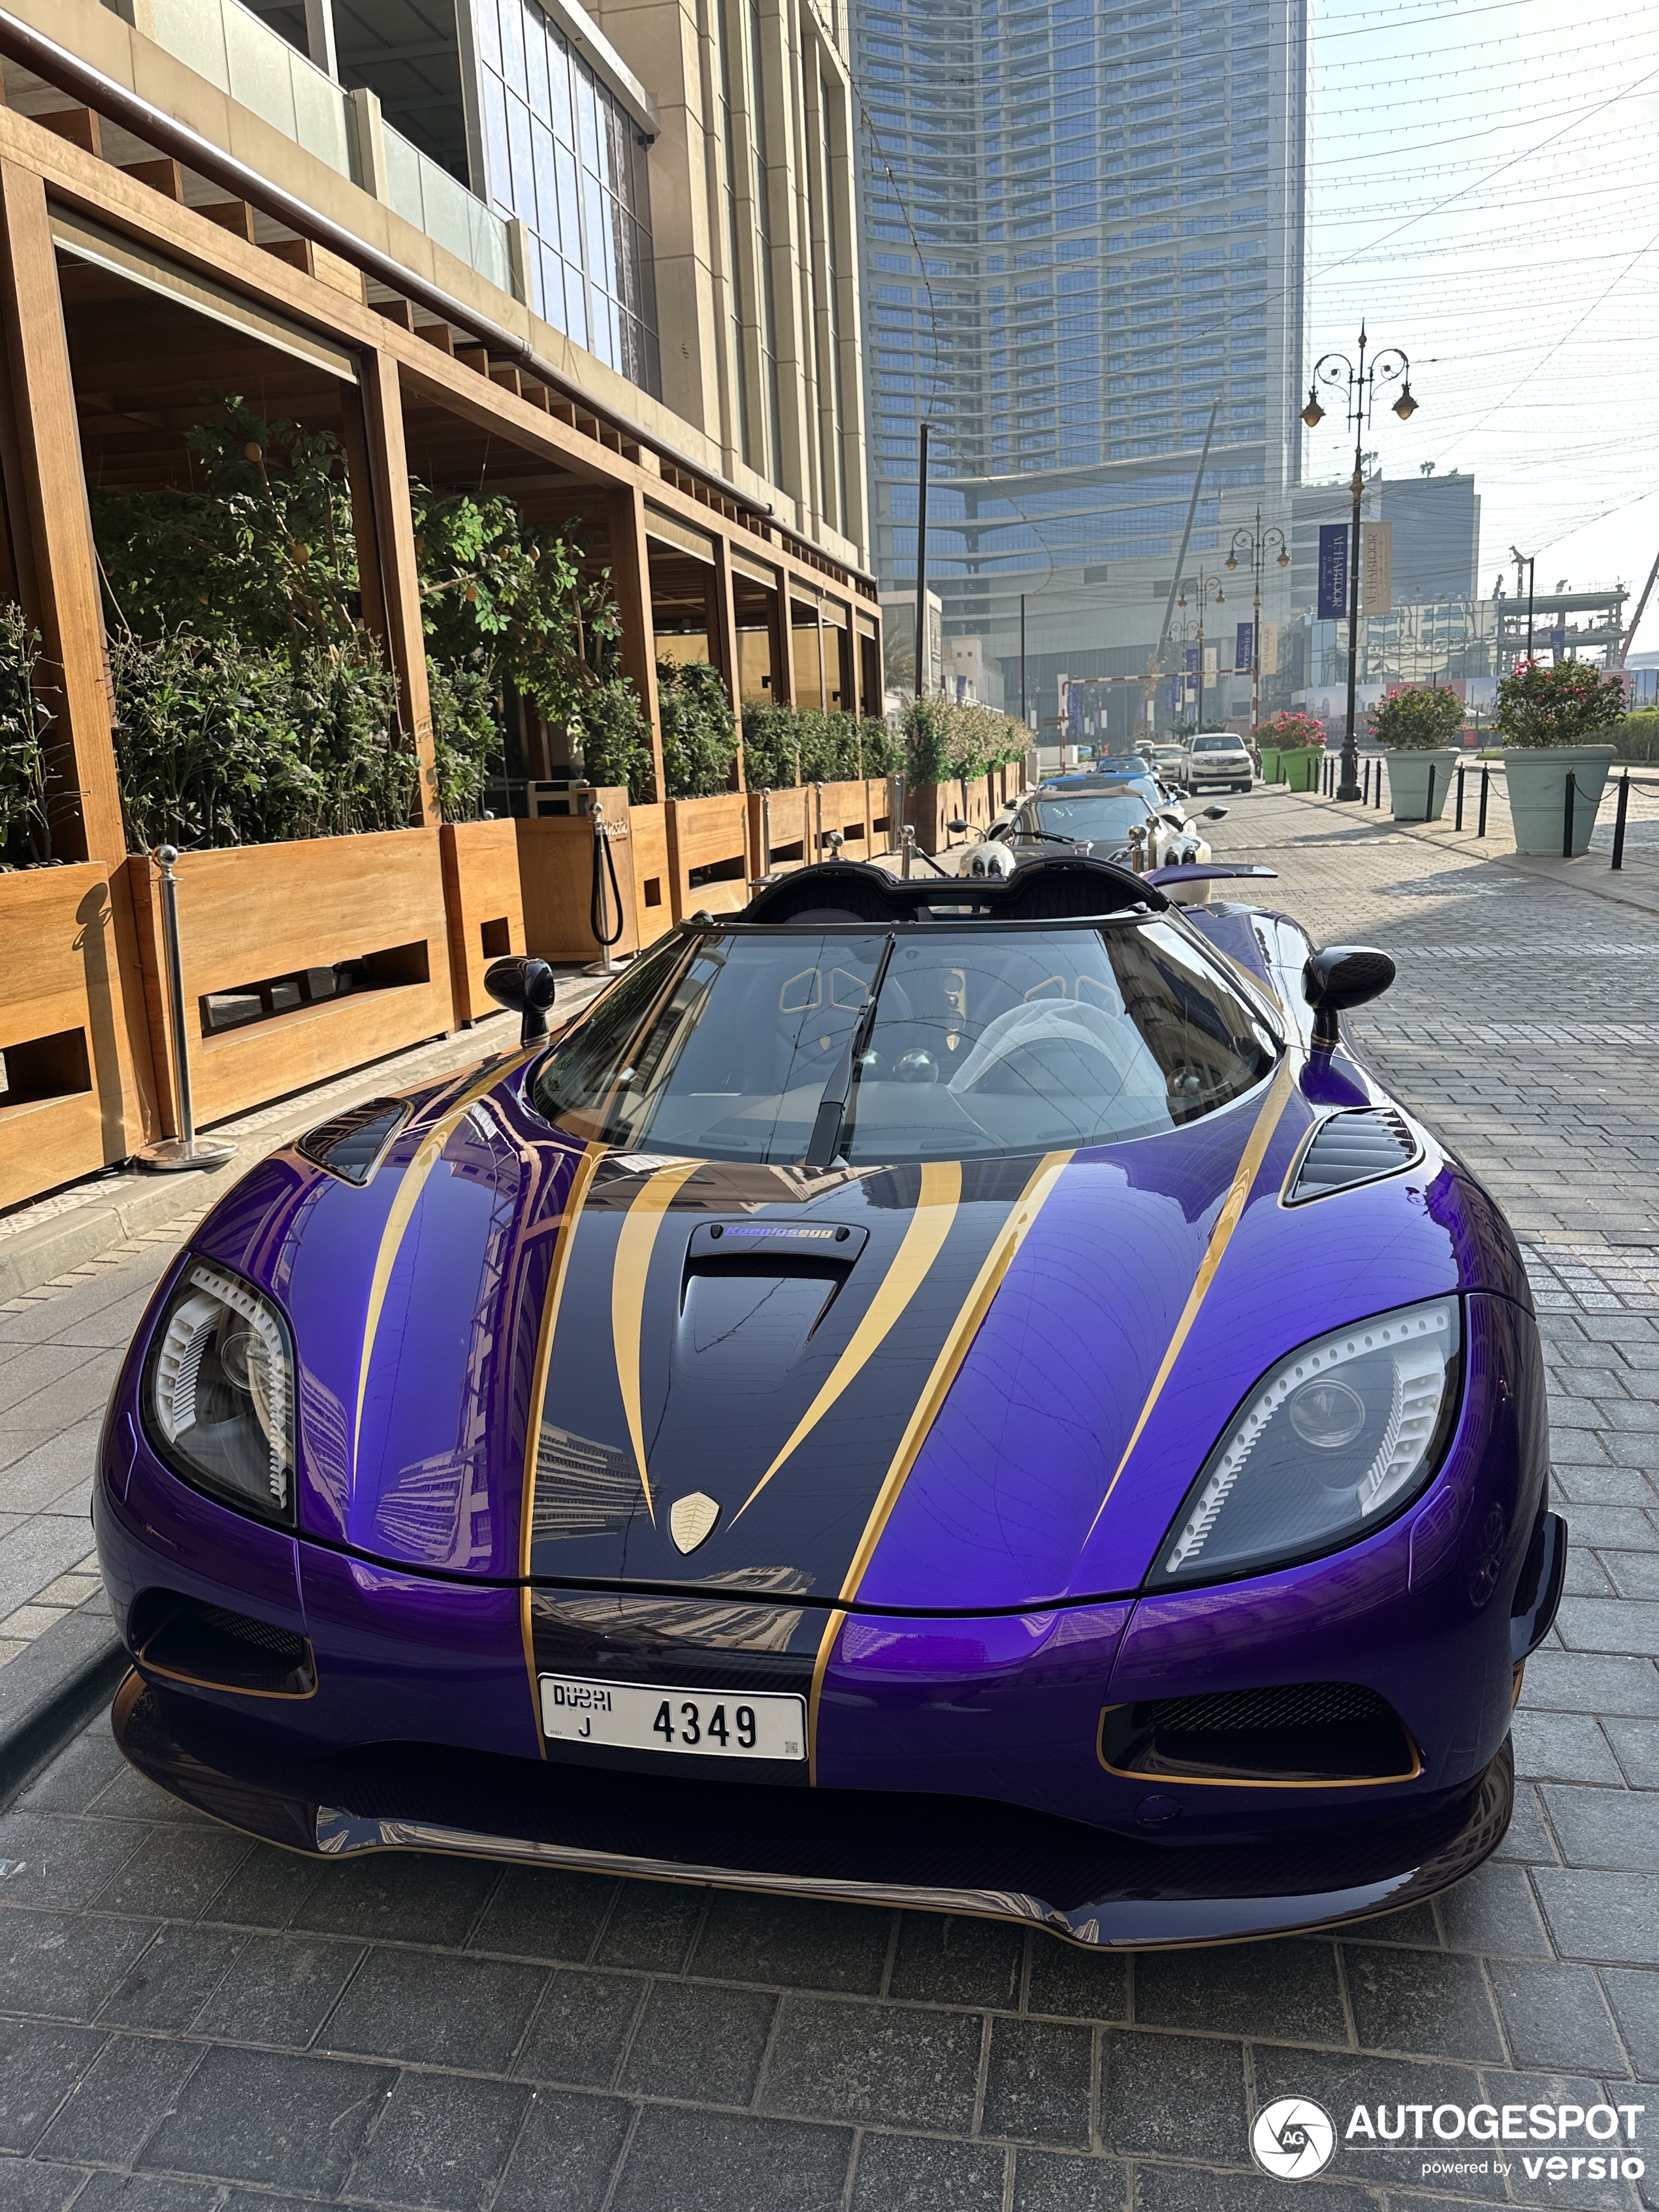 Another purple hypercar emerges, this time in Dubai.